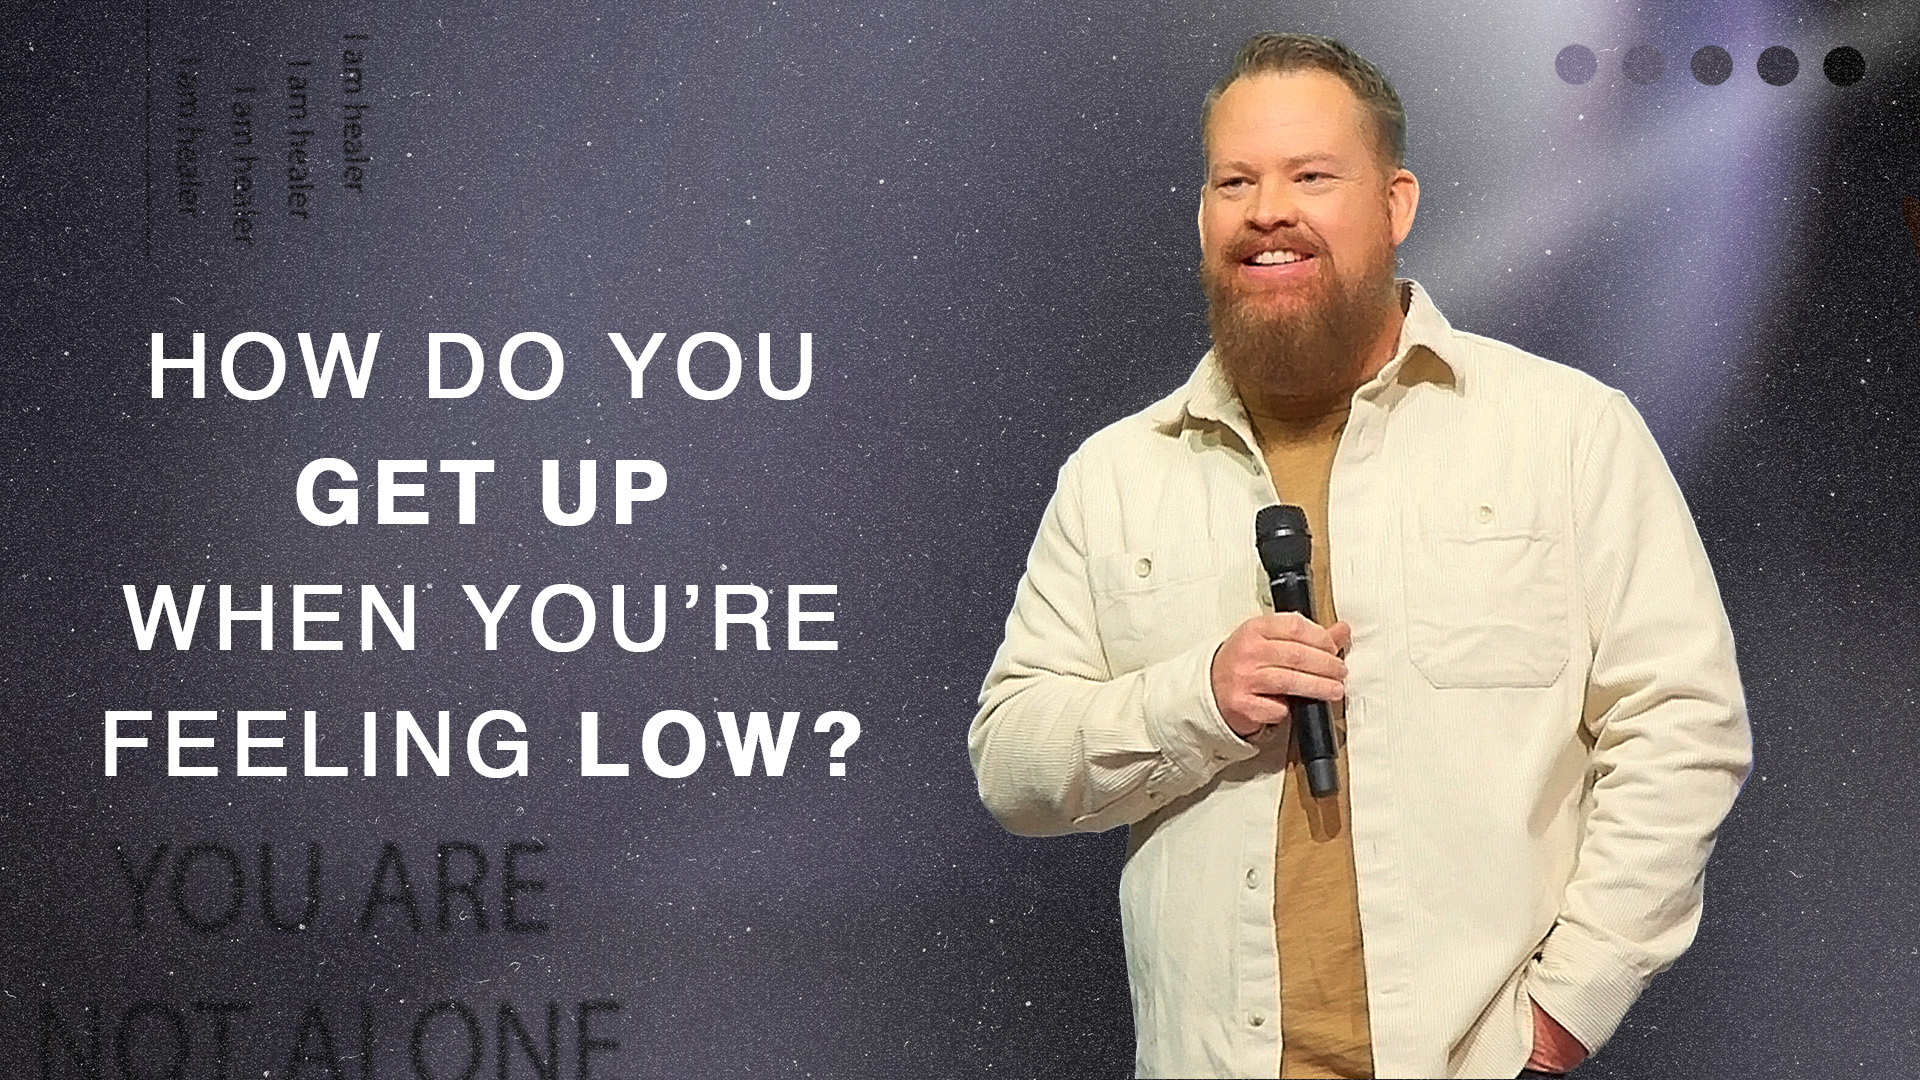 How Do You Get Up When You're Feeling Low?